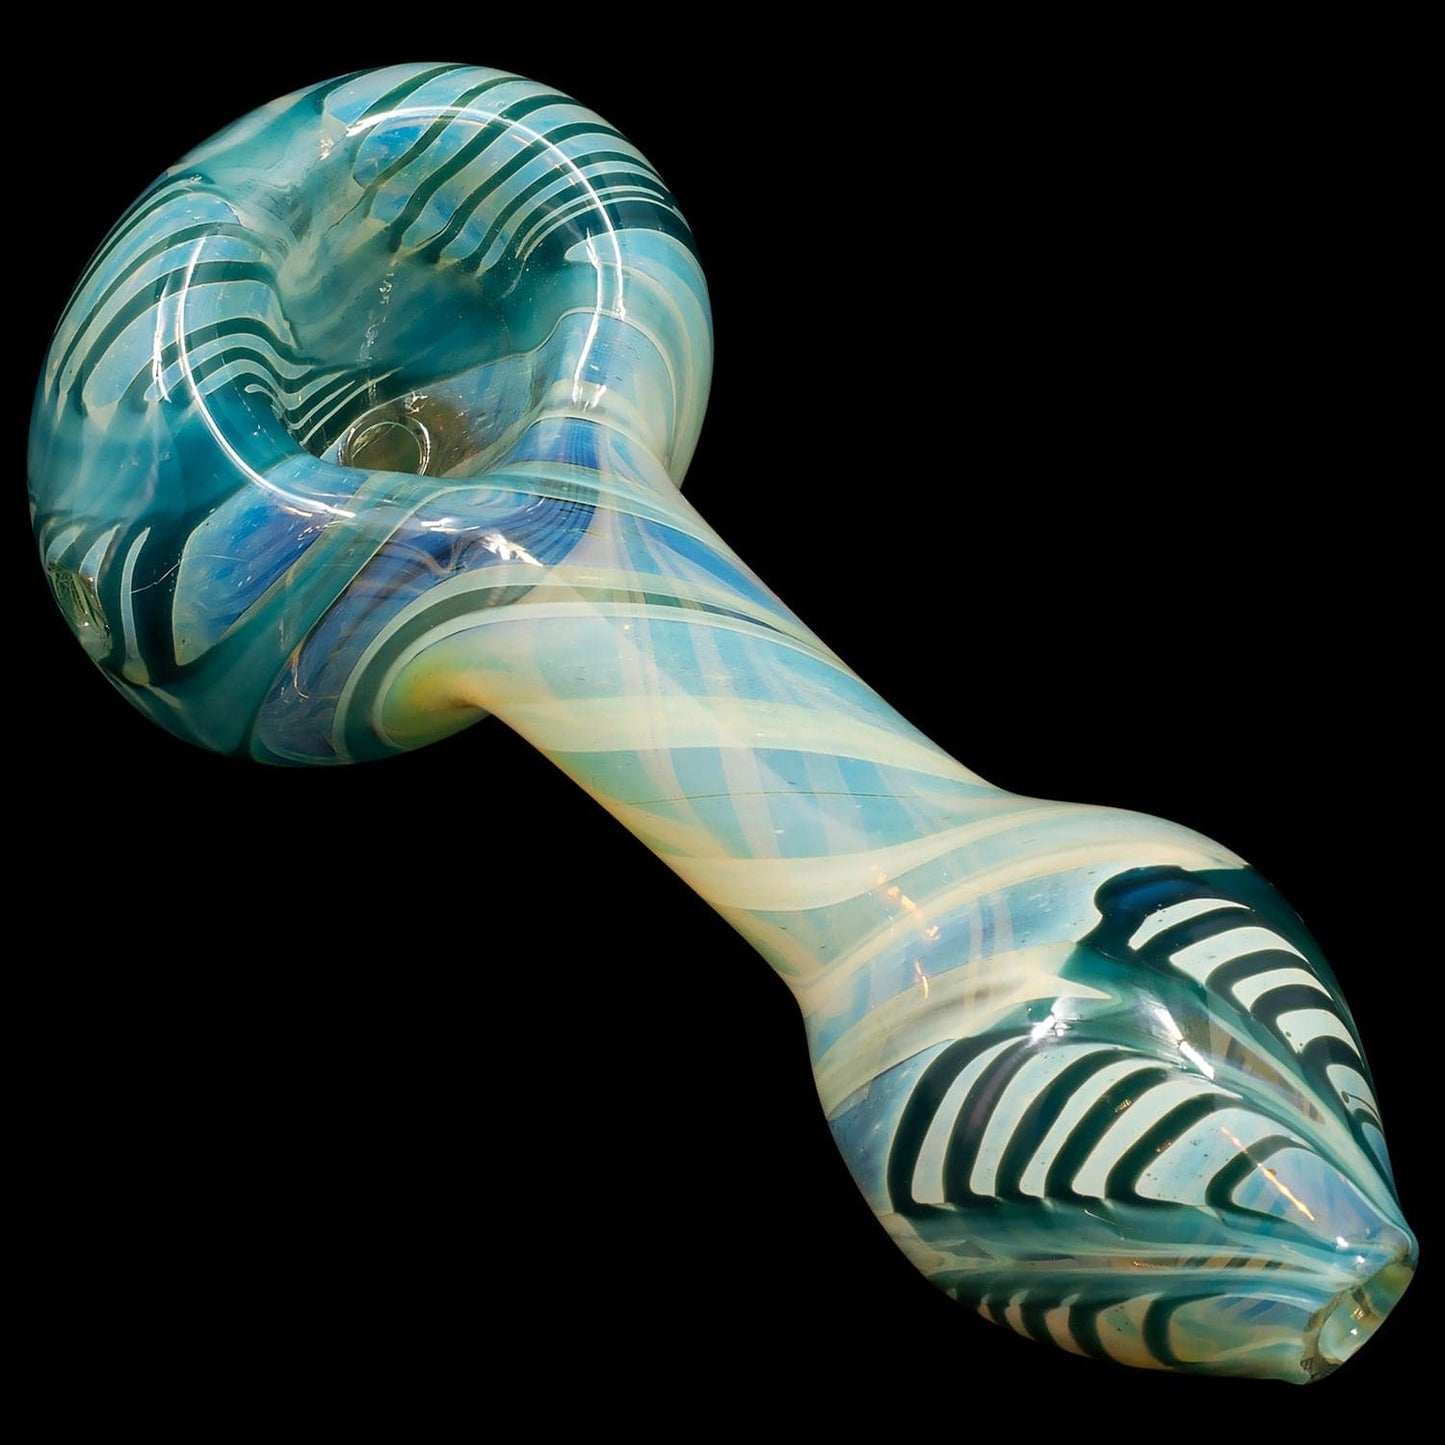 LA Pipes Hand Pipe Teal / 4.5 Inch "Twisty Cane" Spoon Glass Pipe (Various Colors)